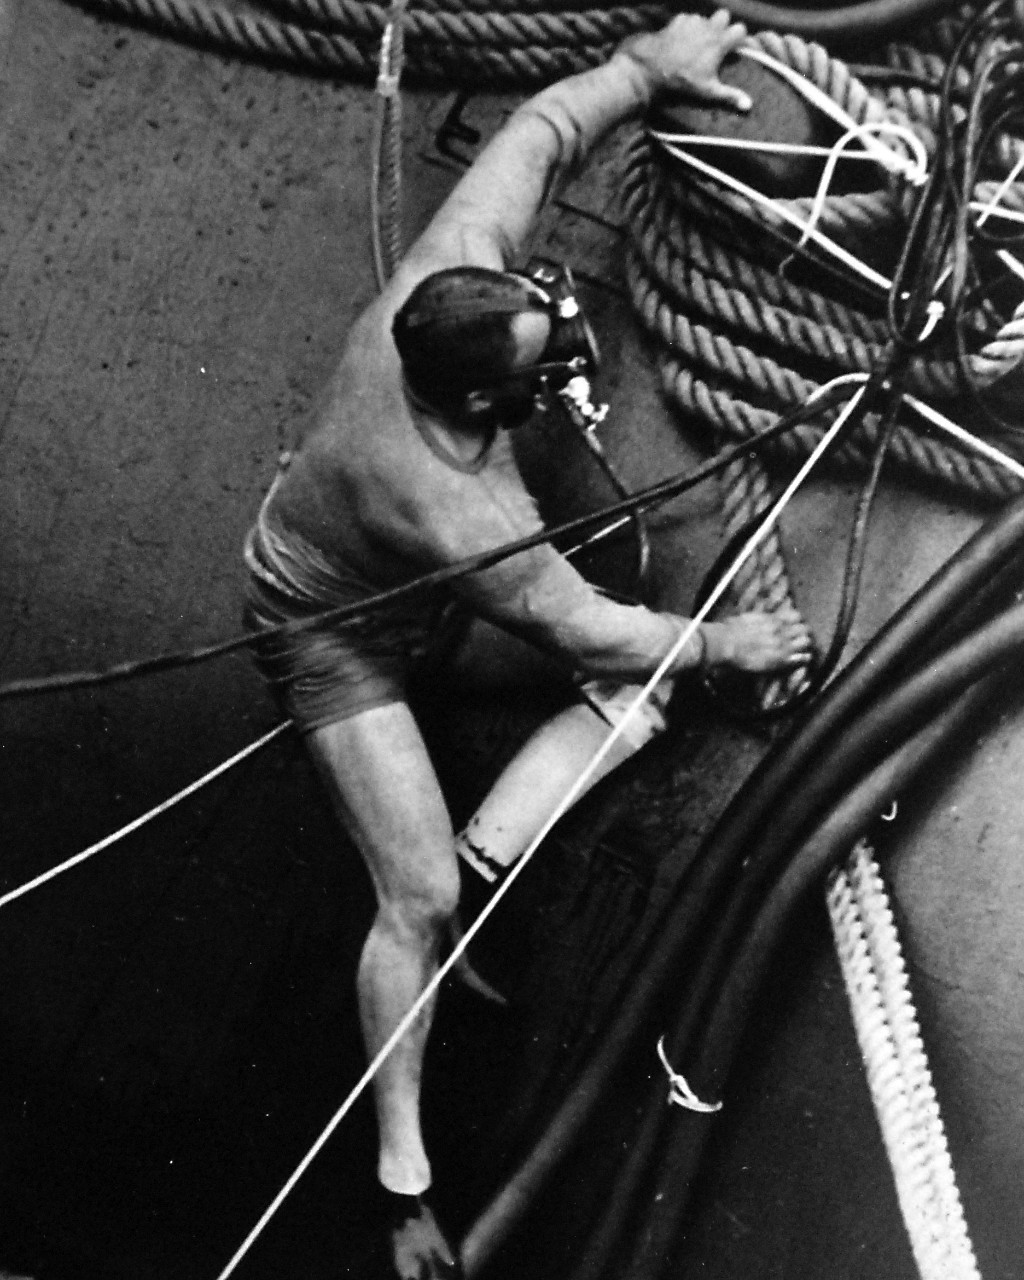 428-GX- USN 118933:  Senior Chief Boatswain’s Mate and Master Diver Carl M. Brashear, April 1971.  Brashear checks line on the deck of USS Hunley (AS-31).    Brashear wears an artificial partial left leg as the result of an accident which occurred in the line of duty.    Photographed by PHC A.J. Walker, April 22, 1971.  Official U.S. Navy Photograph, now in the collections of the National Archives.  